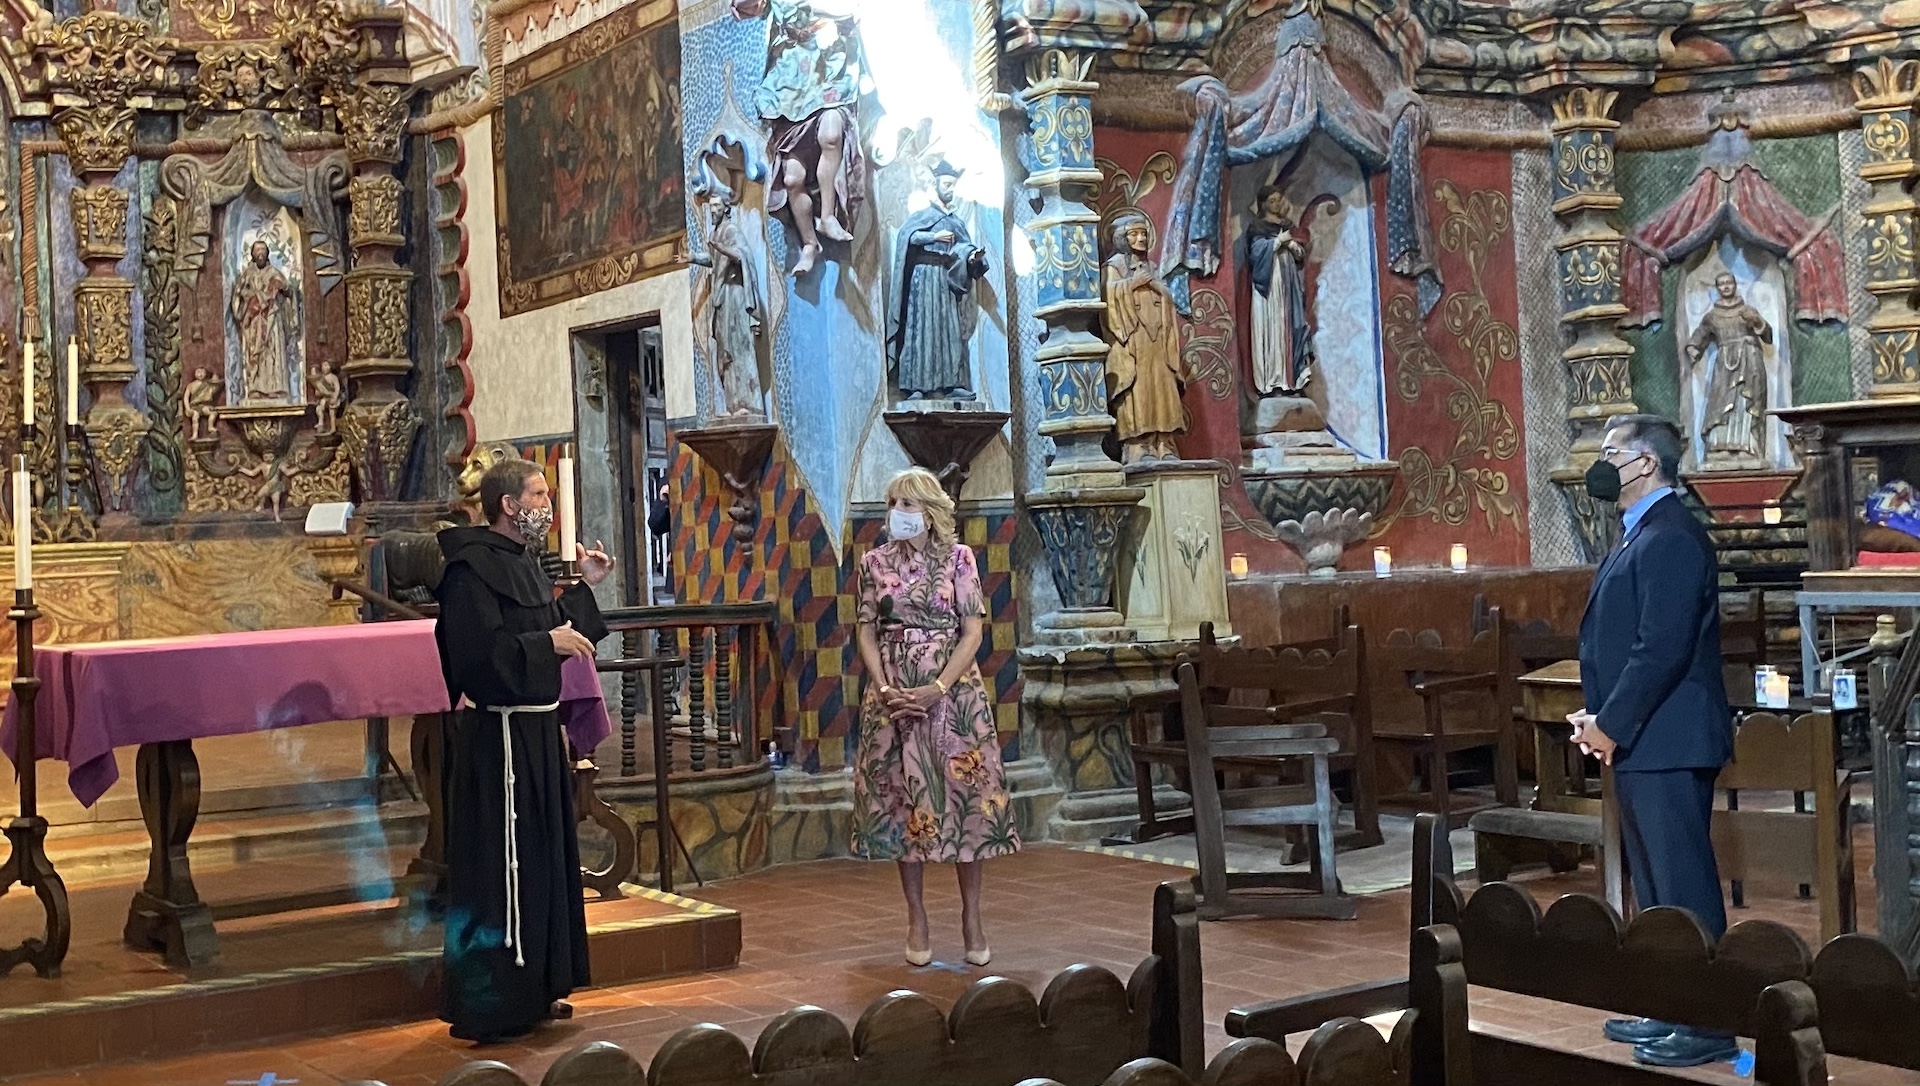 First Lady Jill Biden, center, and Health and Human Services Secretary Xavier Becerra, right, talk with Father Bill Minkel at Mission San Xavier del Bac on March 8, 2022.